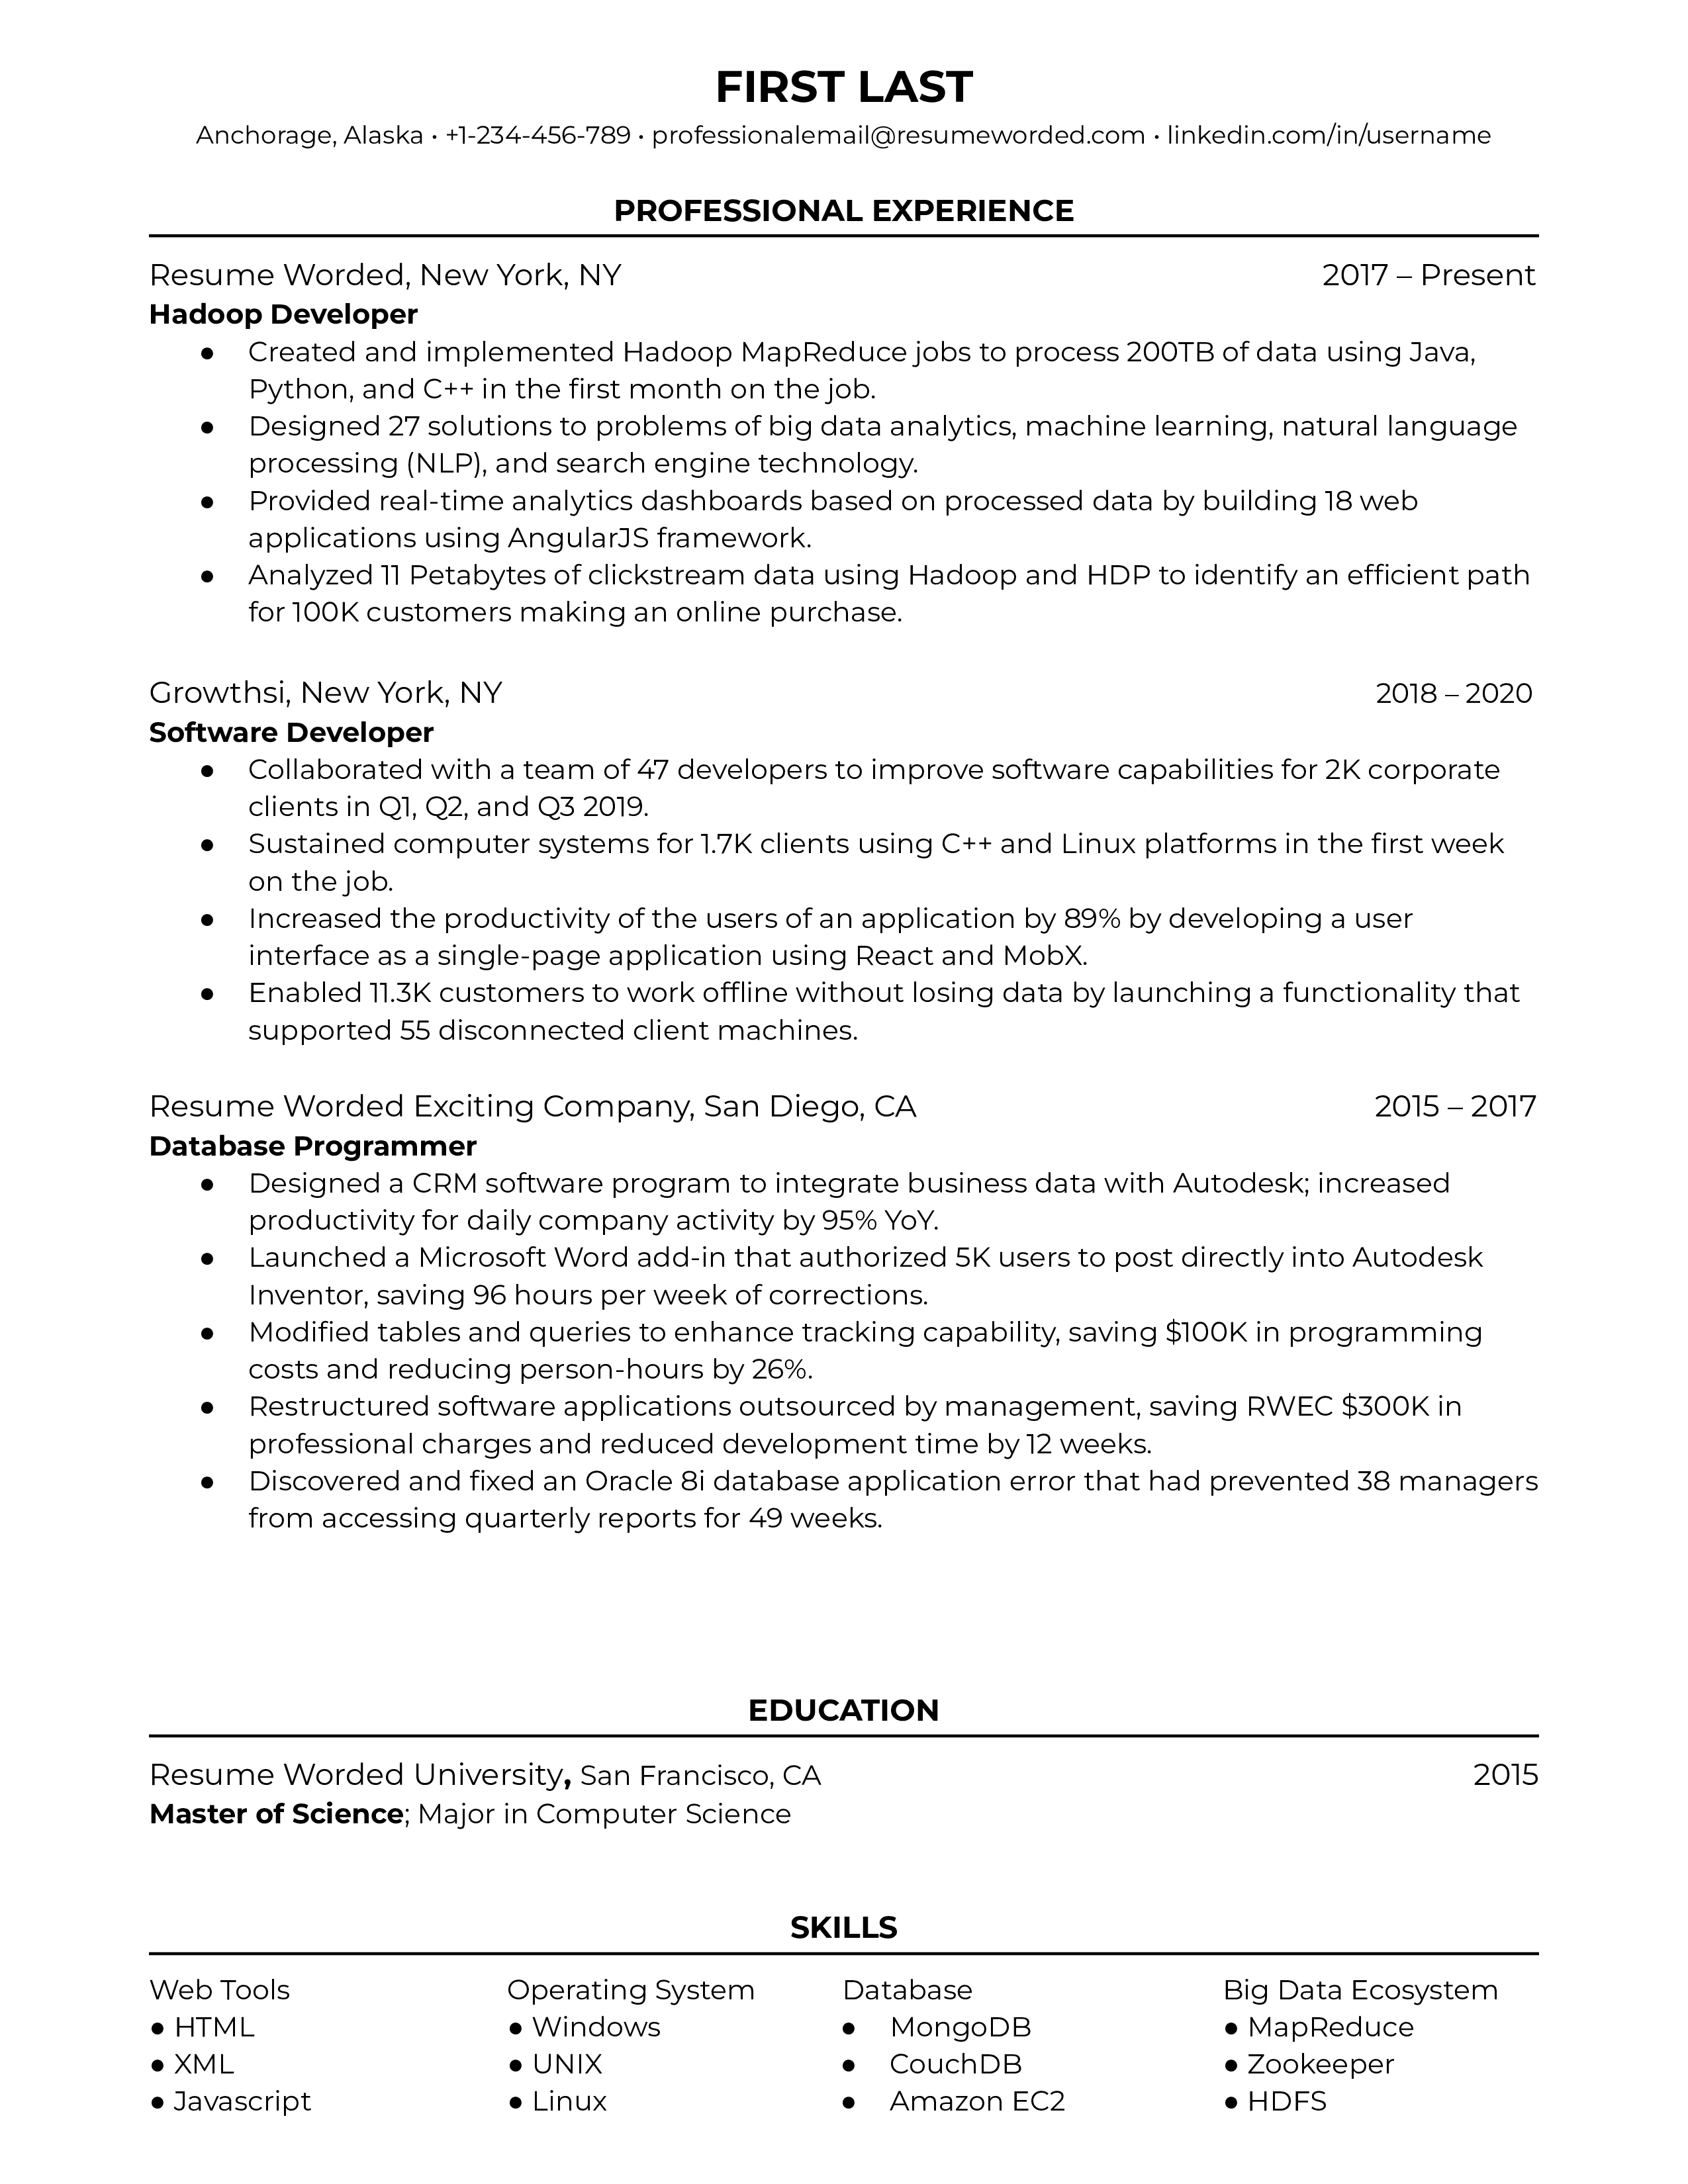 Hadoop Developer resume featuring specific project experiences and process improvements.